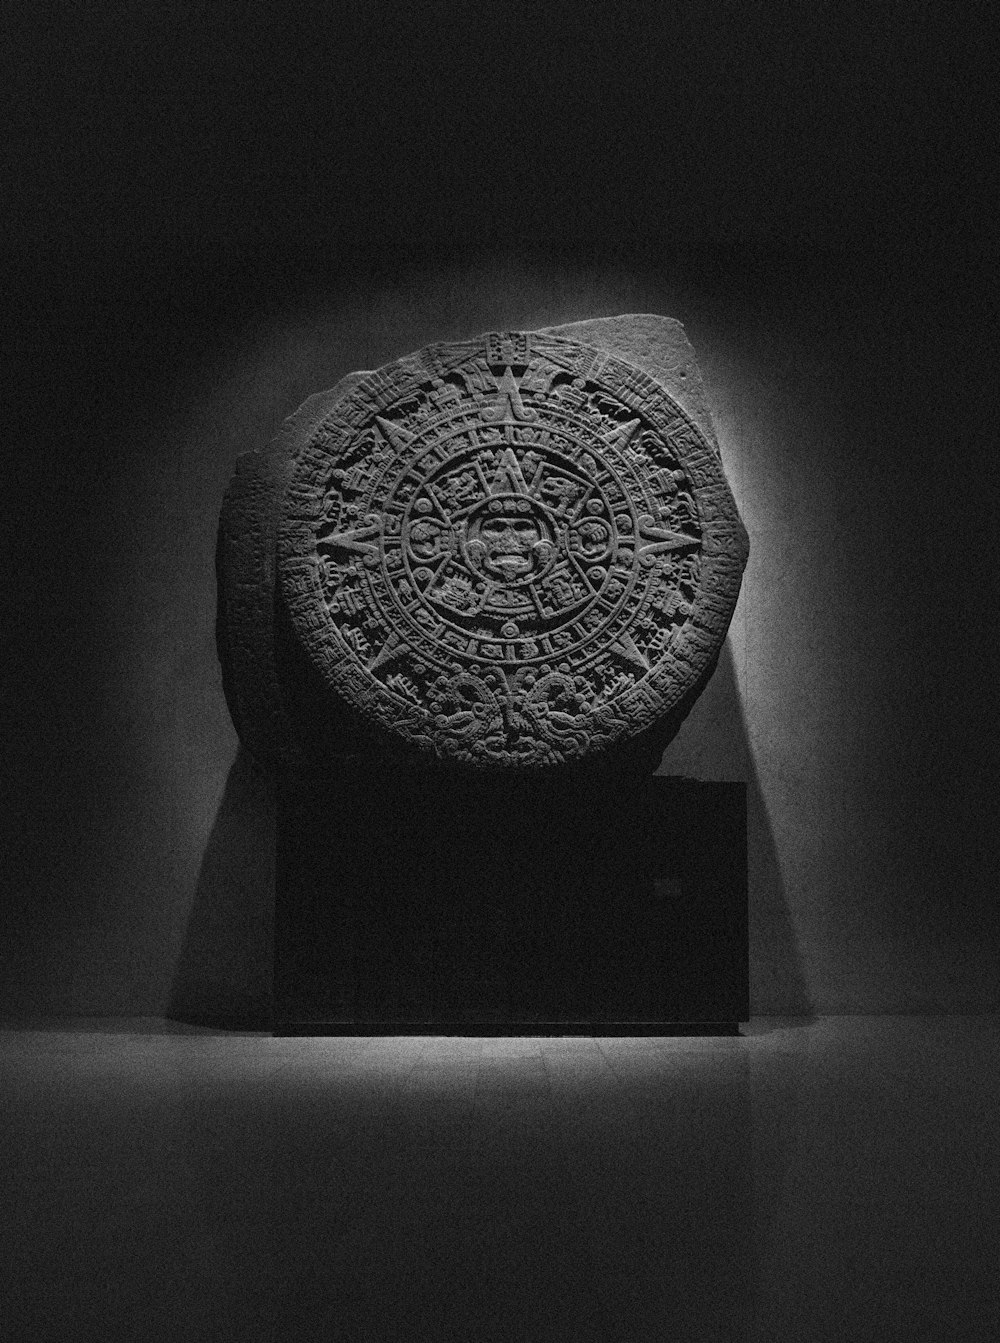 a black and white photo of a stone in a dark room